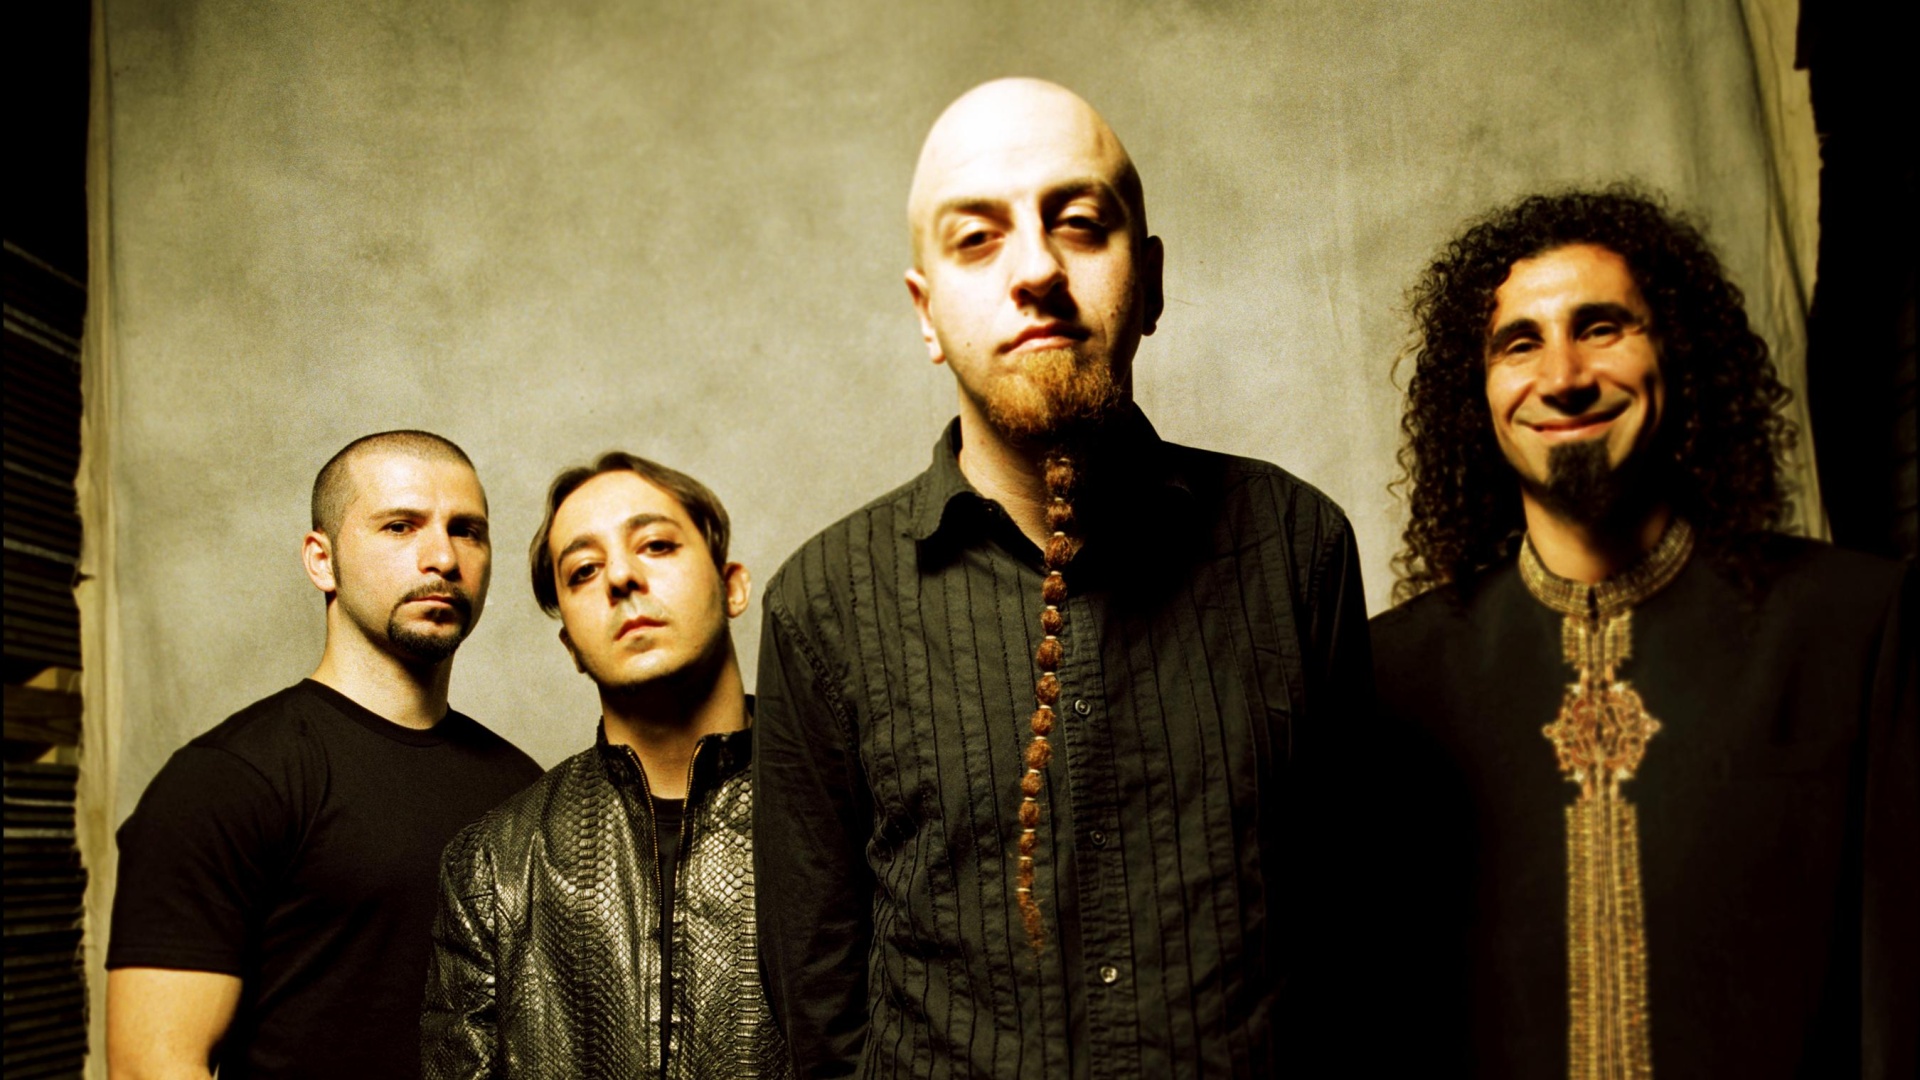 system of a down wallpaper,facial hair,event,photography,musical ensemble,family